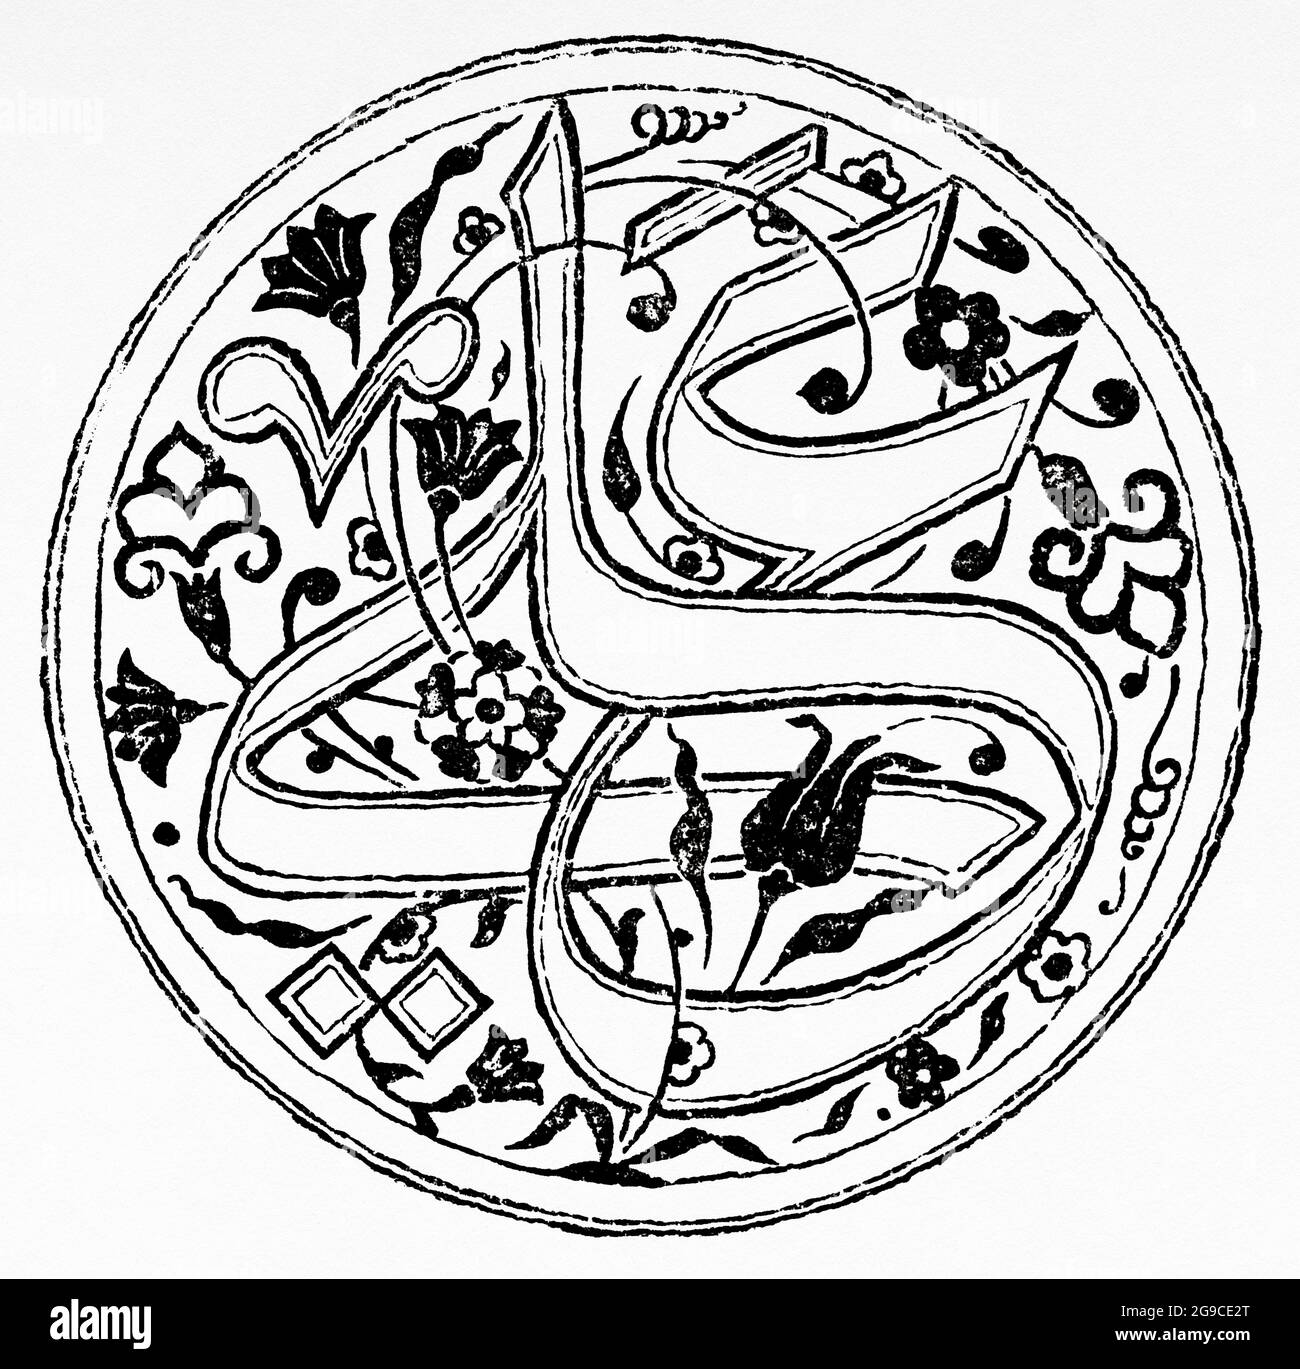 Monogram of Ali. Abu al-Hasan Ali ibn Abi Talib (656-661) was the cousin and son-in-law of the Prophet Muhammad. He was the first male to convert to Islam and the first Imam for the Shiites. He ruled as the fourth and last Orthodox Caliph. Egypt, North Africa. Old 19th century engraved illustration from El Mundo Ilustrado 1879 Stock Photo